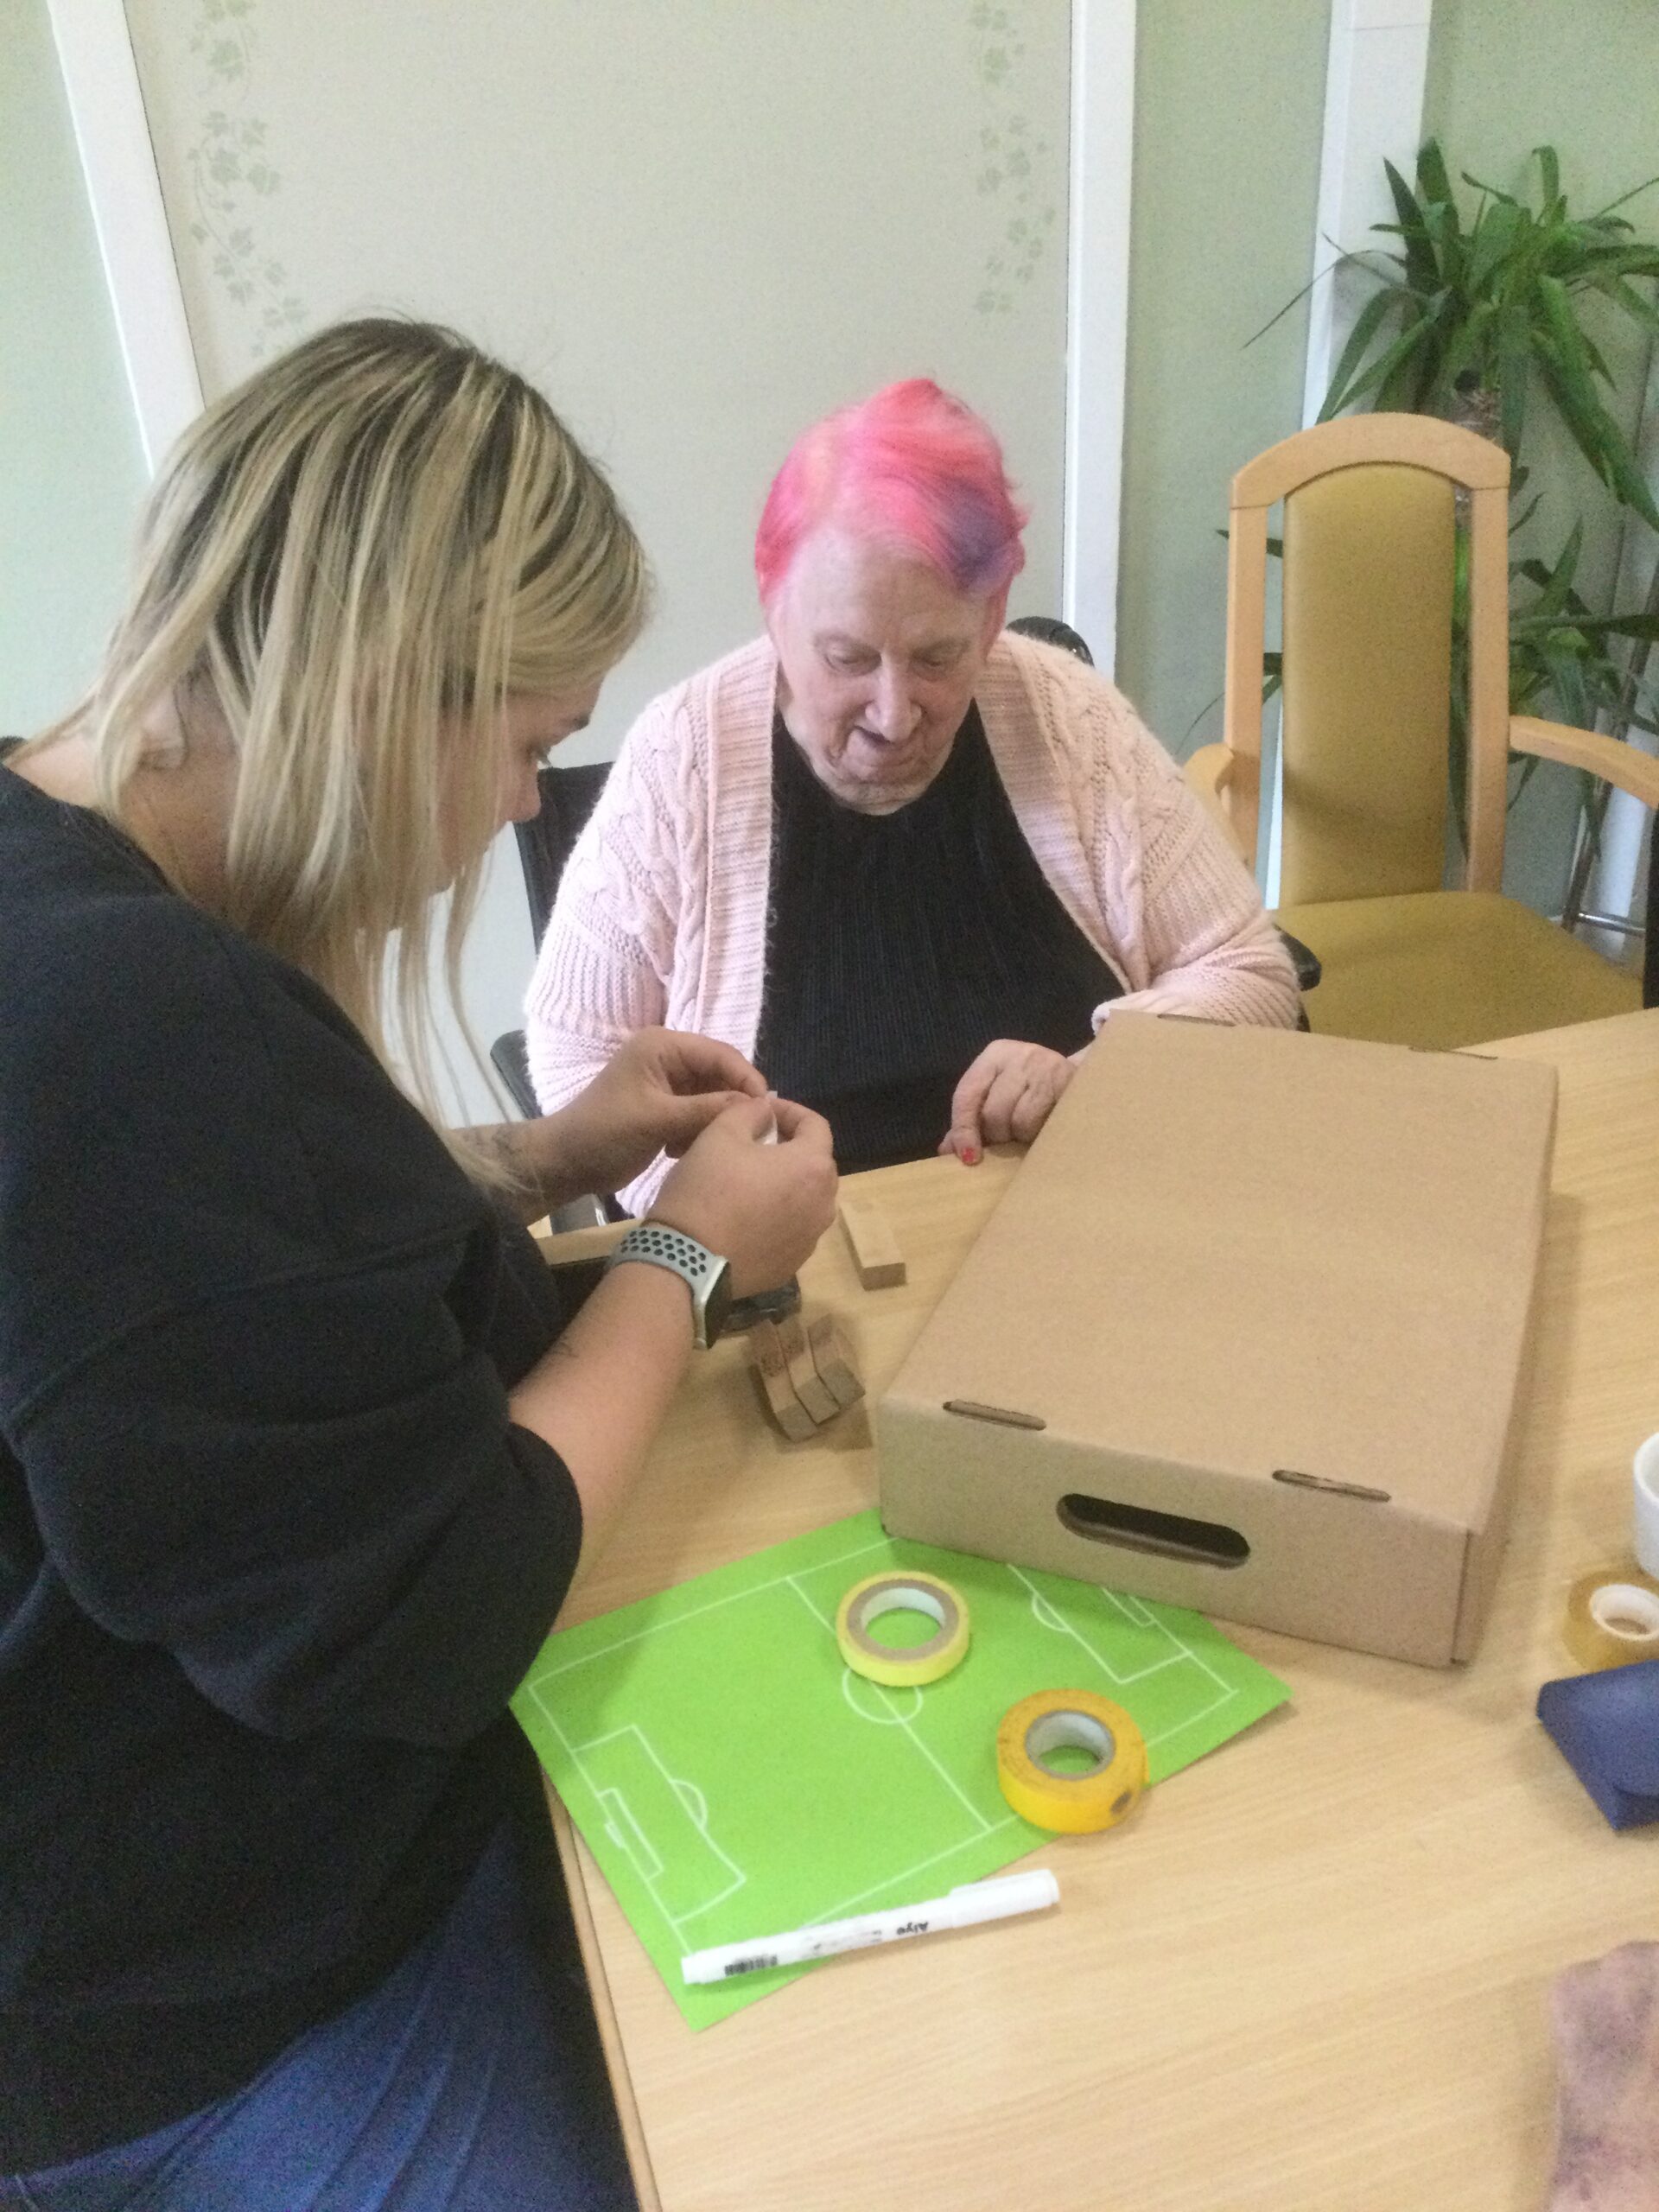 Two women seated at a table, with an inverted cardboard box in front of them applying something to the base